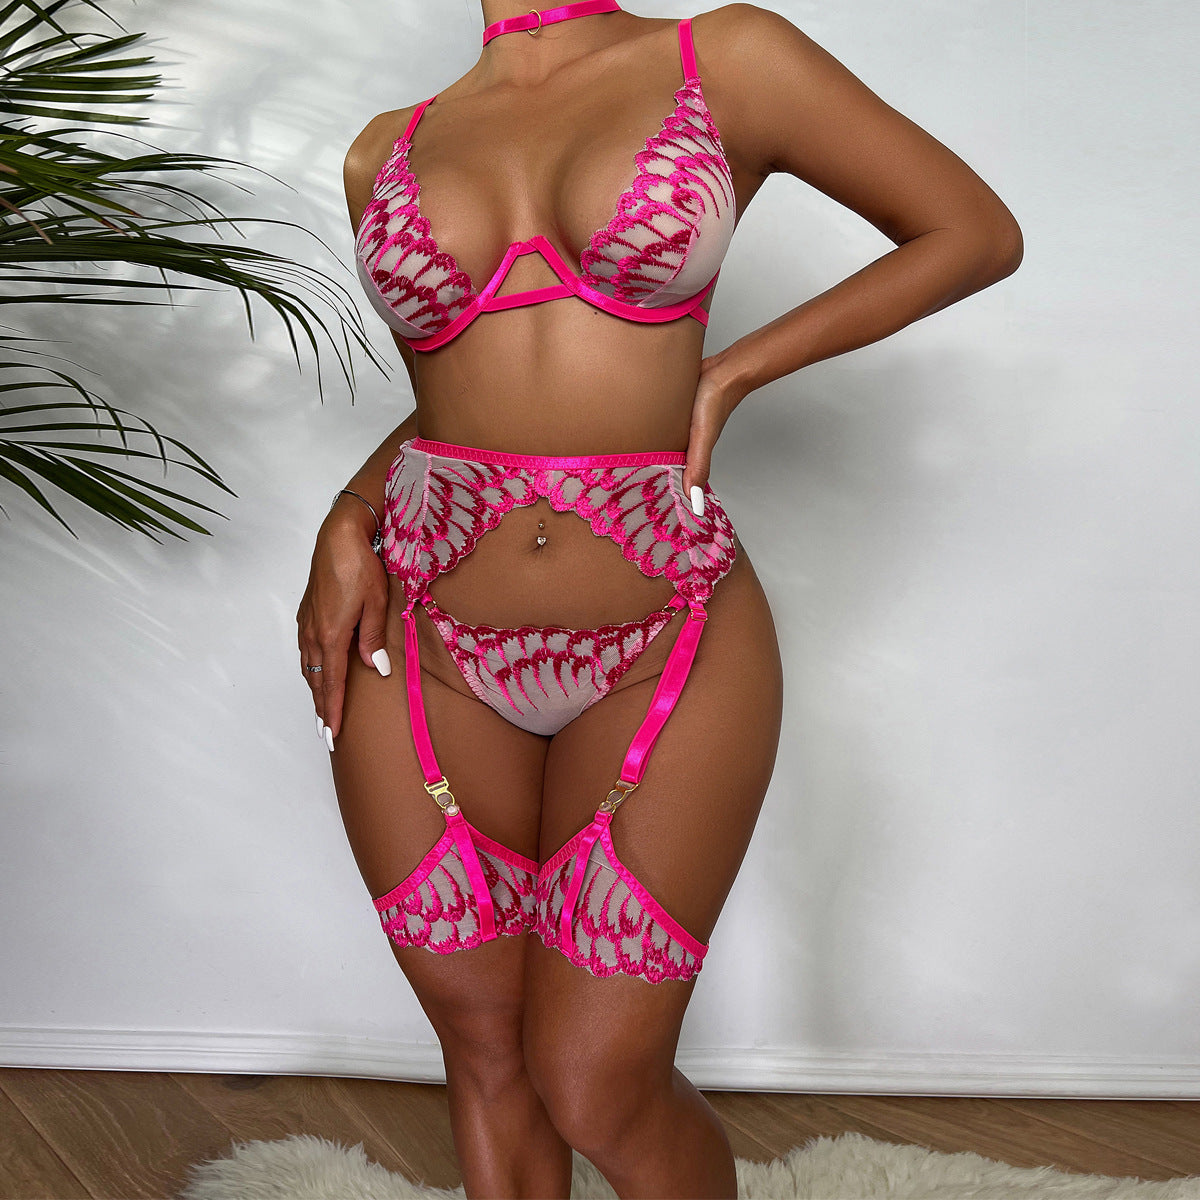 New Wings Embroidery Sexy Lingerie Set Hot Pink